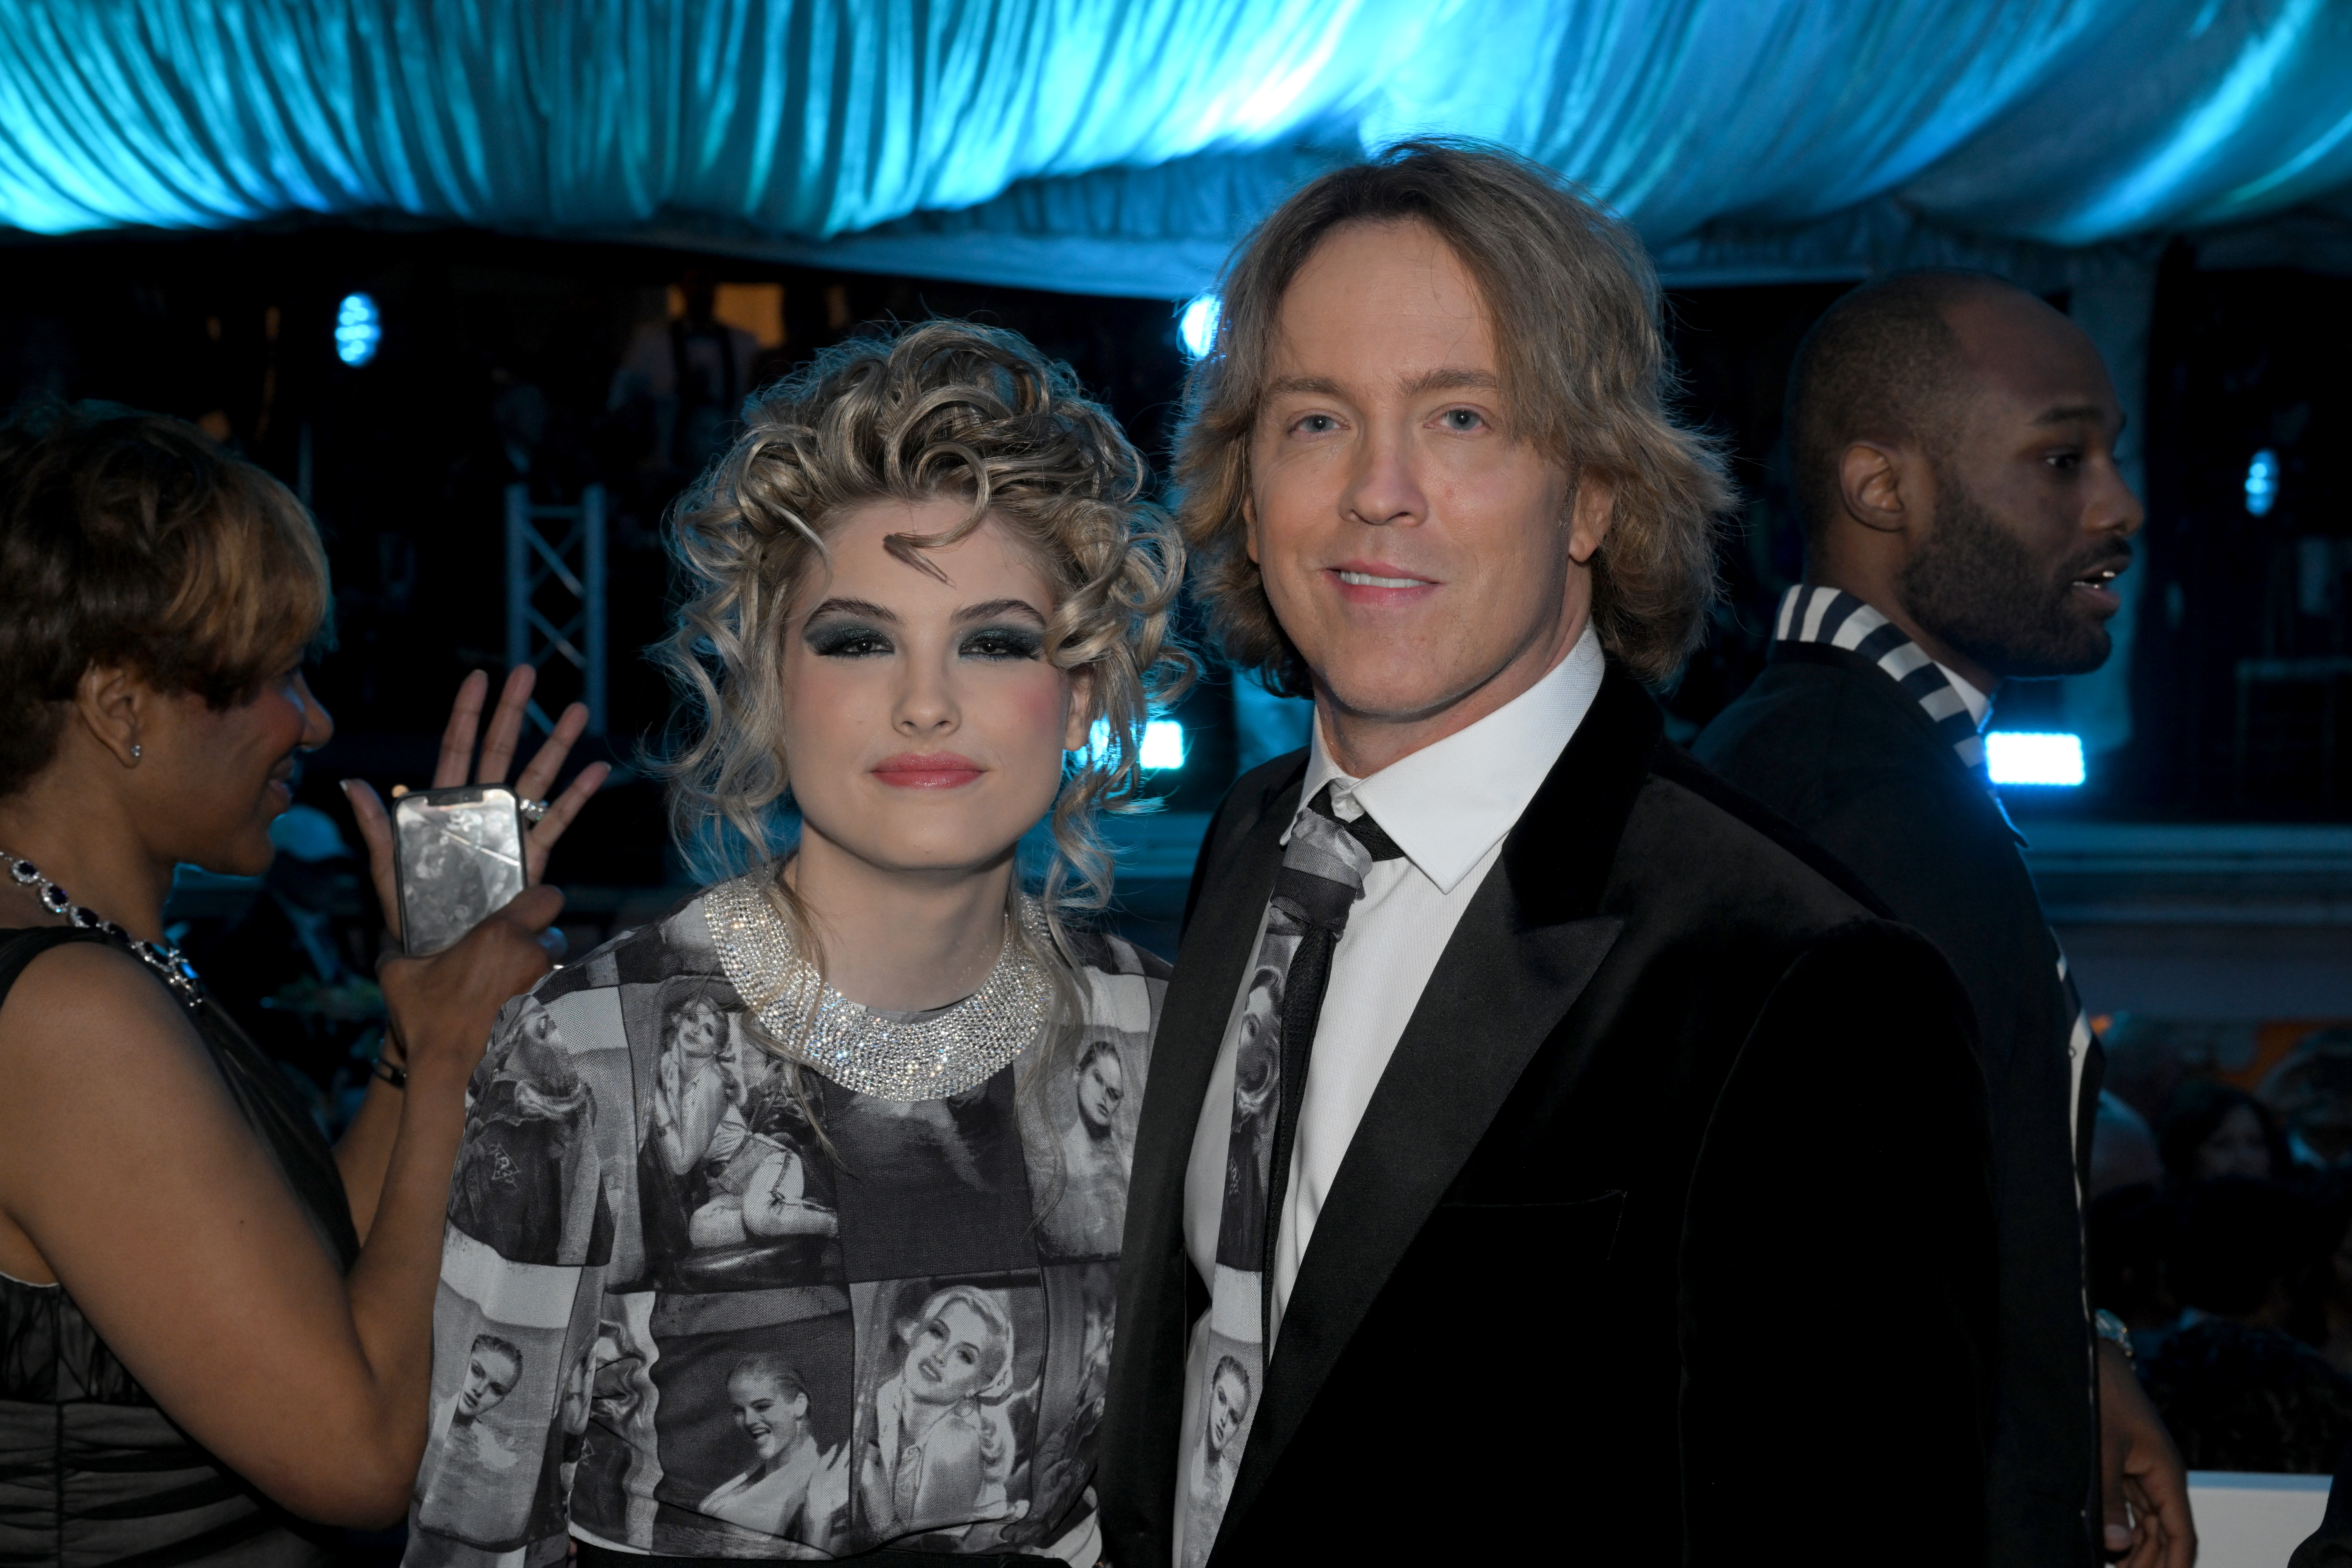 Dannielynn and Larry Birkhead at the 149th Kentucky Derby Barnstable Brown Gala in Louisville, Kentucky on May 5, 2023 | Source: Getty Images